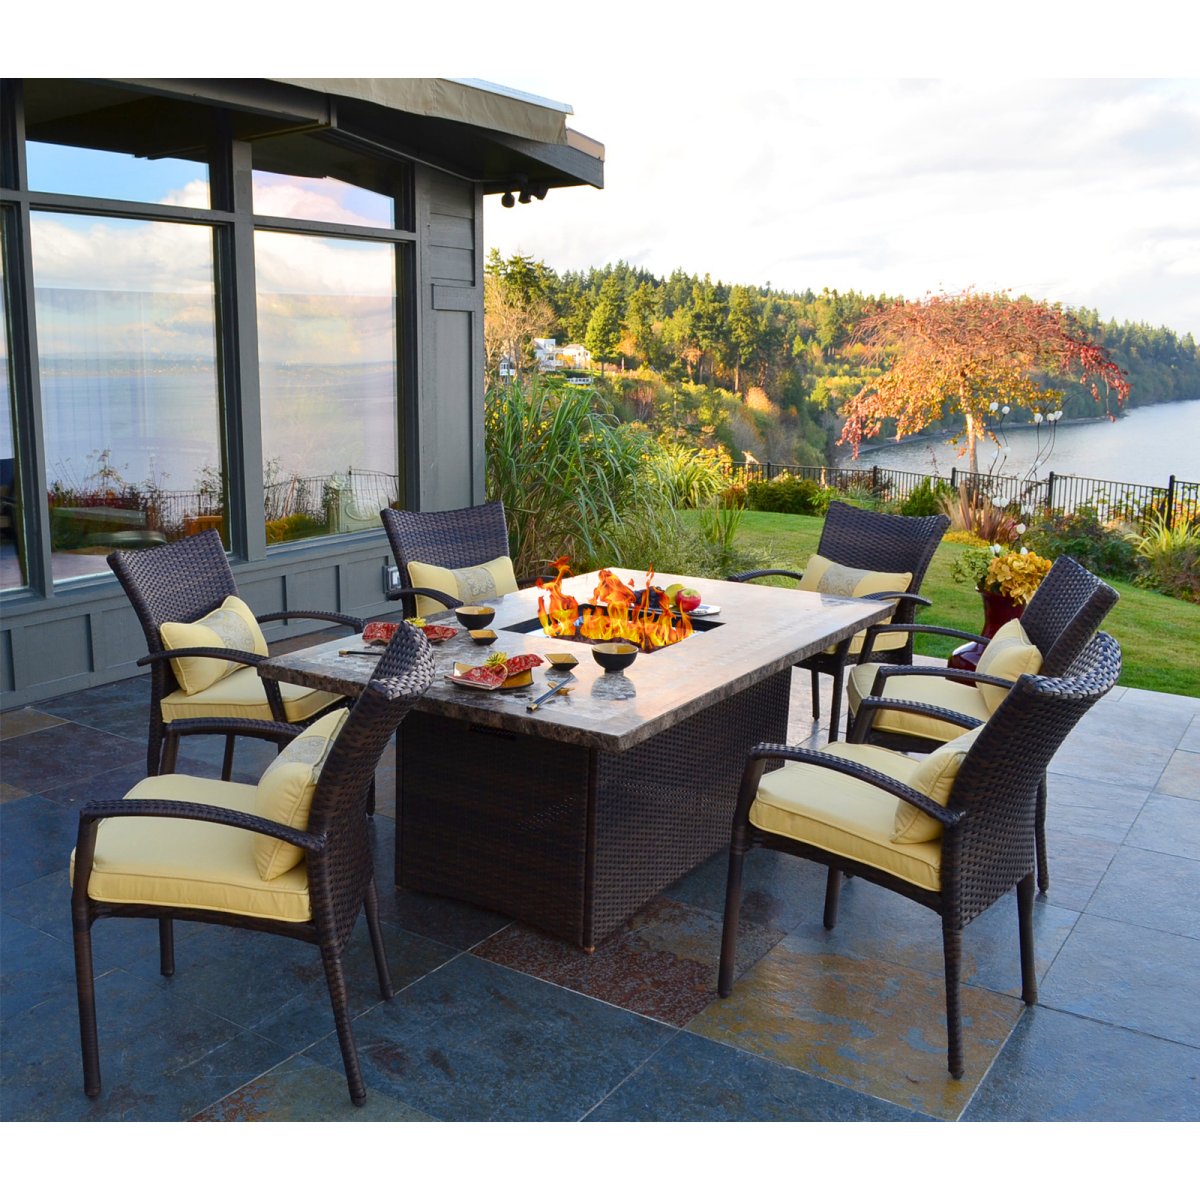 Outdoor dining tables with gas fire pit | Hawk Haven